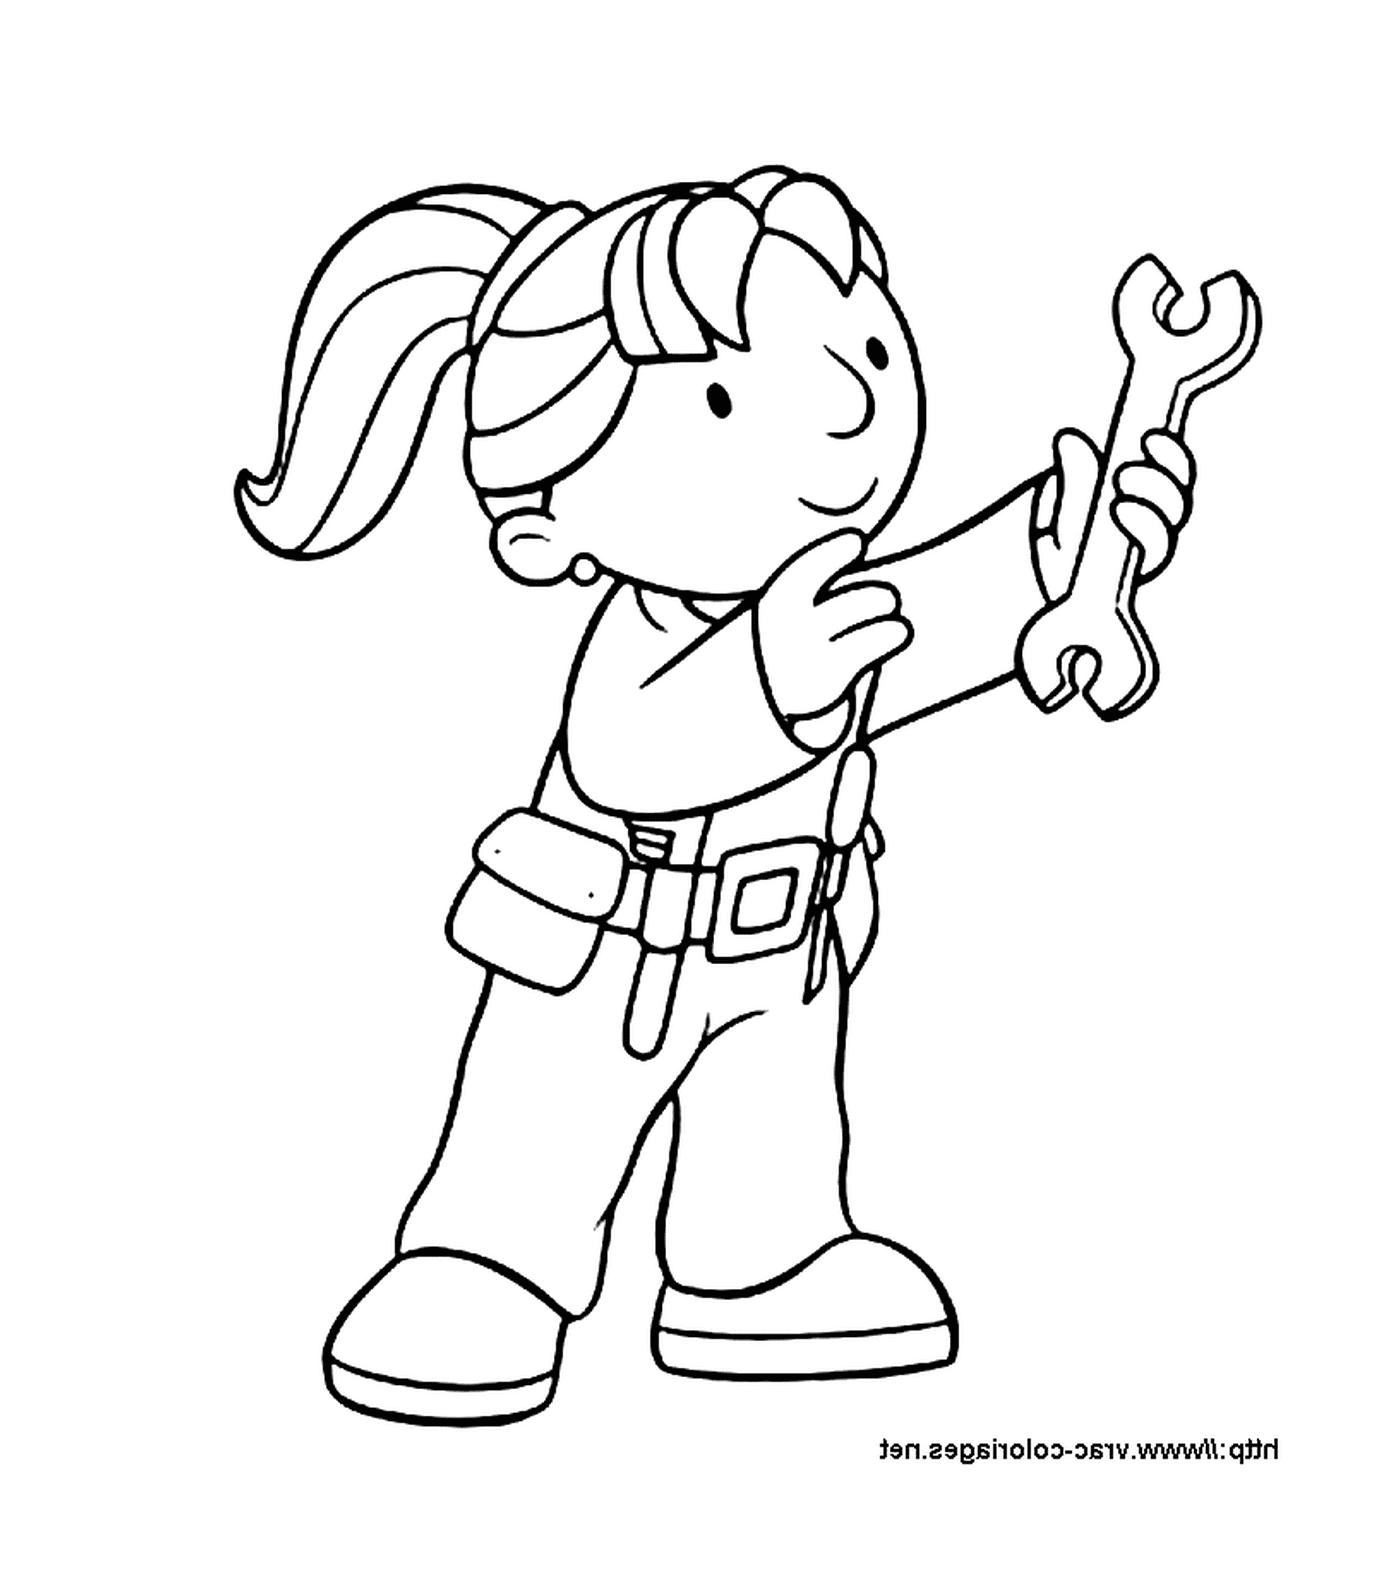  A woman holding a wrench 